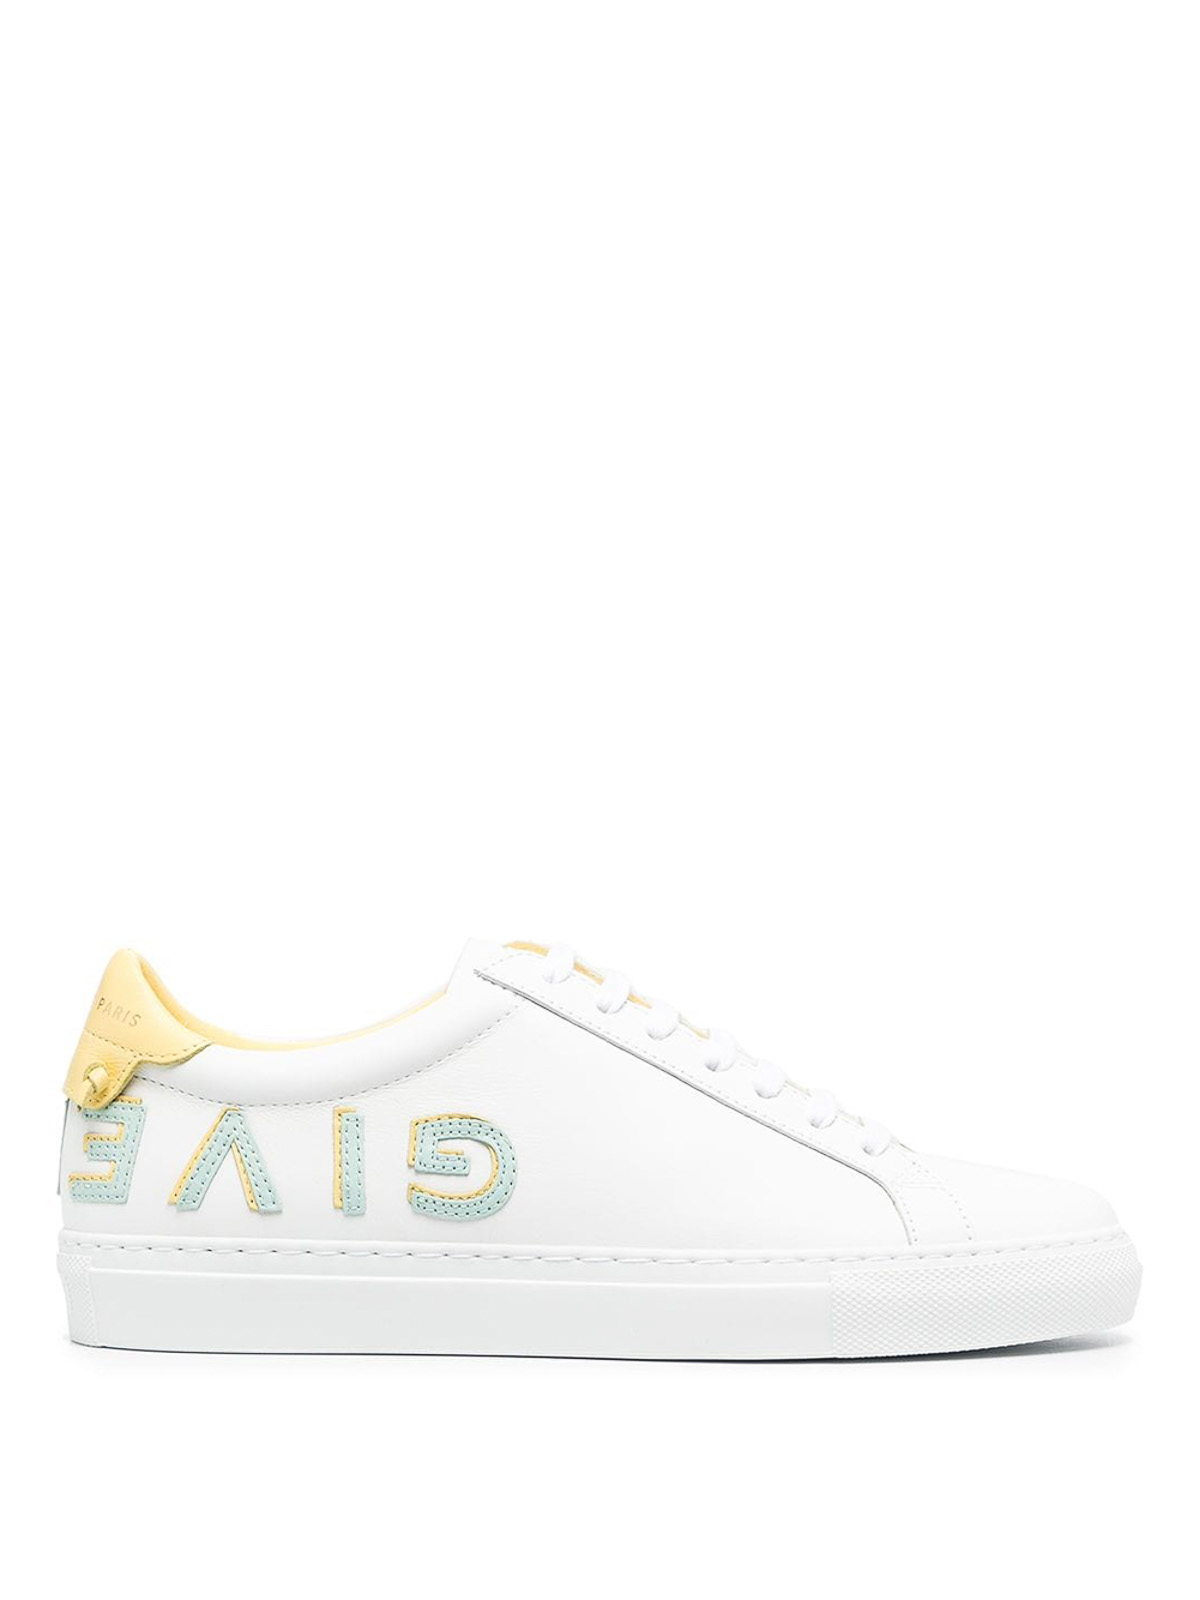 Givenchy Leathers URBAN STREET SNEAKERS